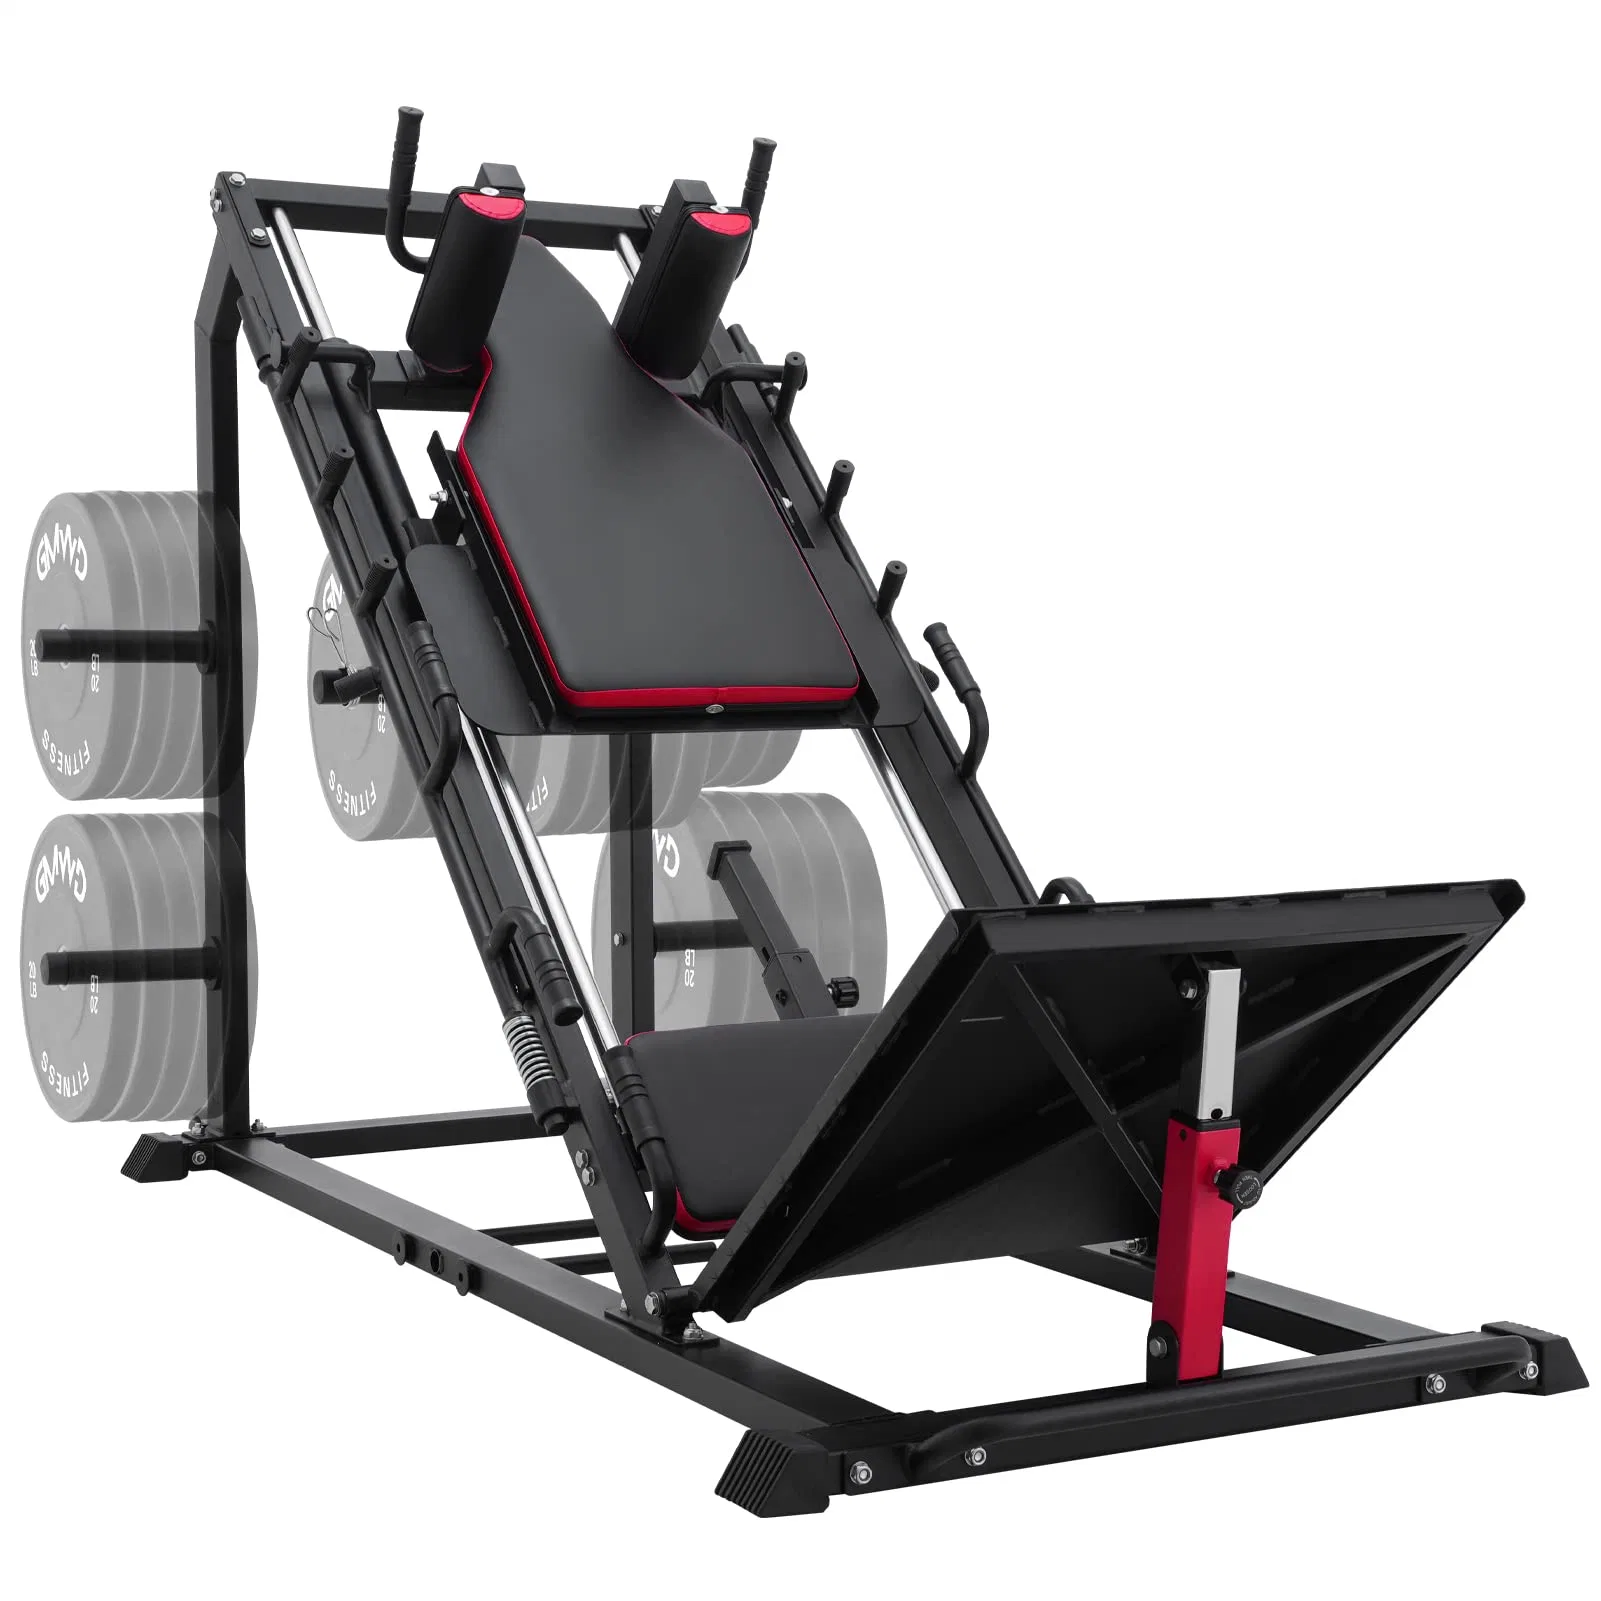 Vente à chaud Gym Fitness Equipment Linear Bearing Lower Body Special Leg Machine d'exercice